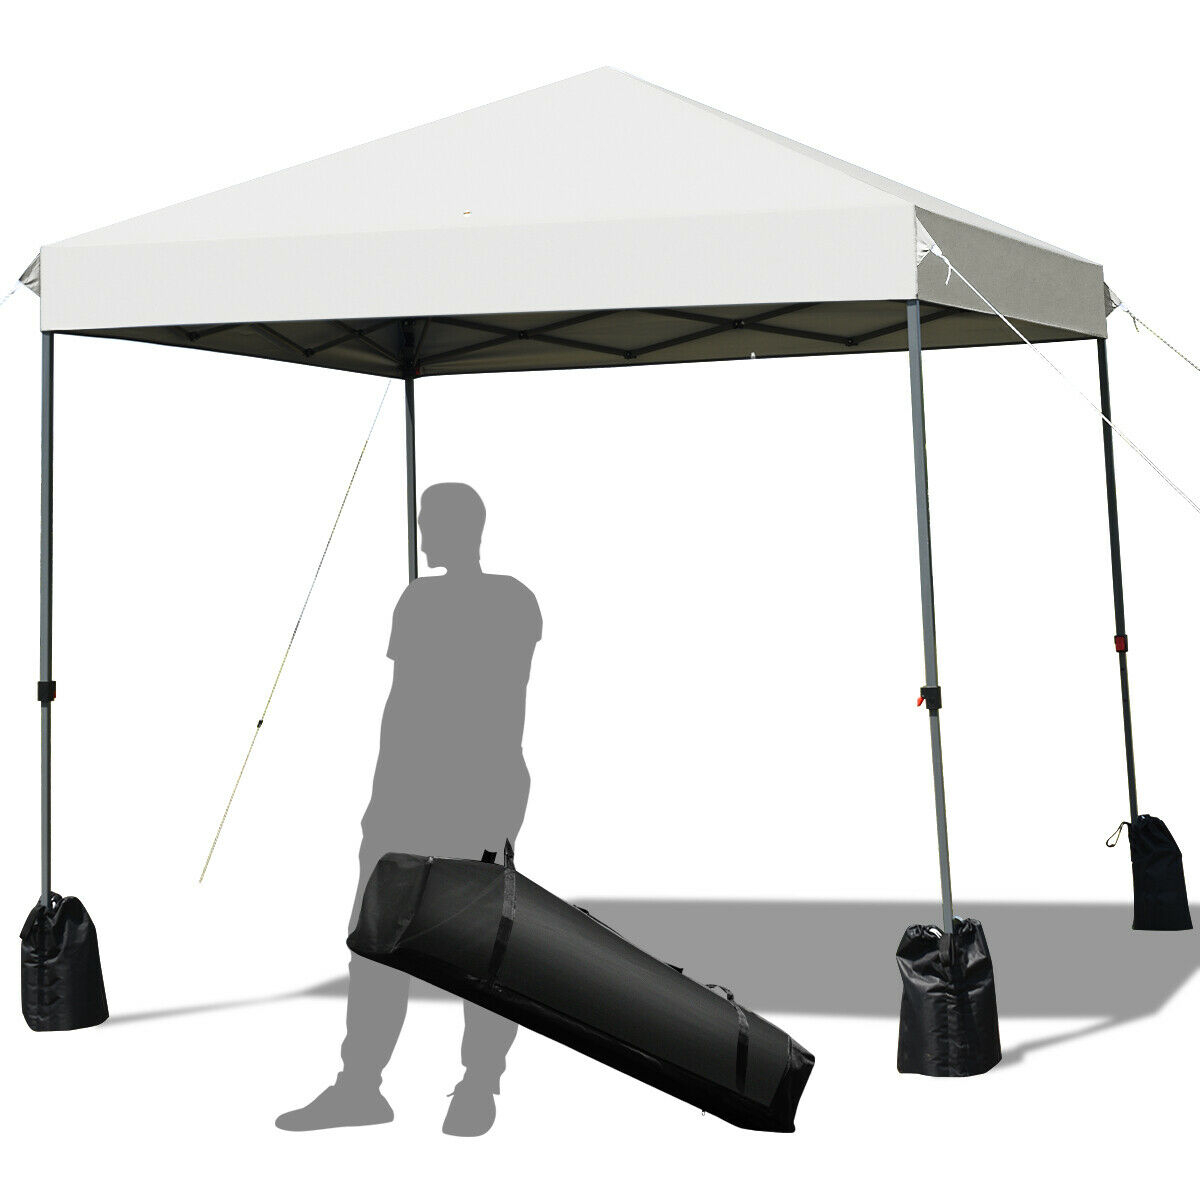 8x8 FT Pop Up Canopy Tent Shelter Wheeled Carry Bag 4 Canopy Sand Bag - White